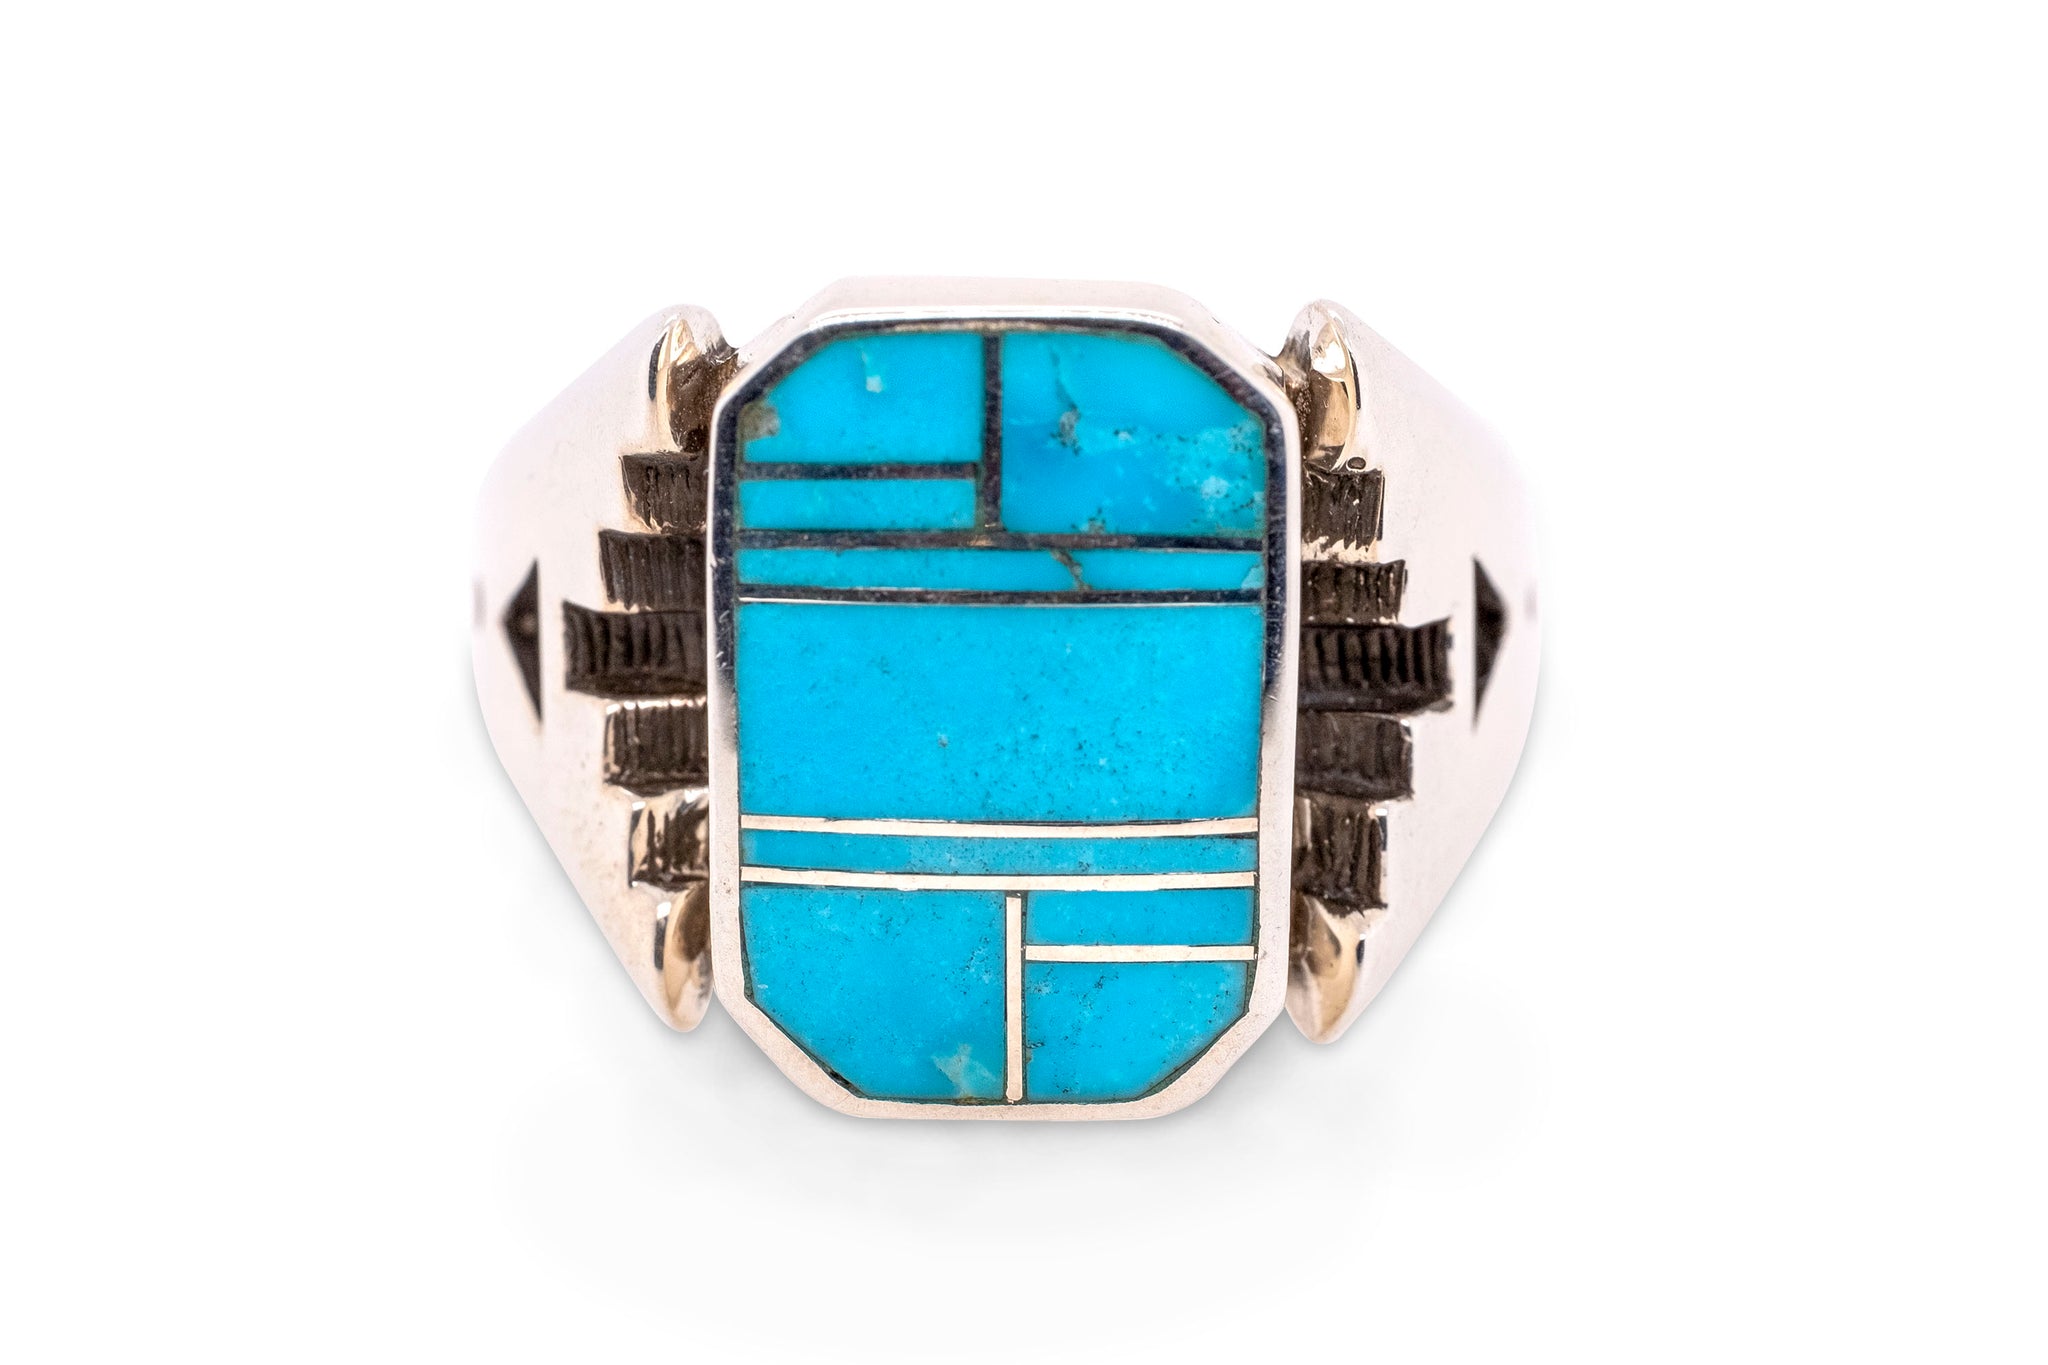 Vintage Turquoise Ring with Leaf Accent - Four Winds Gallery